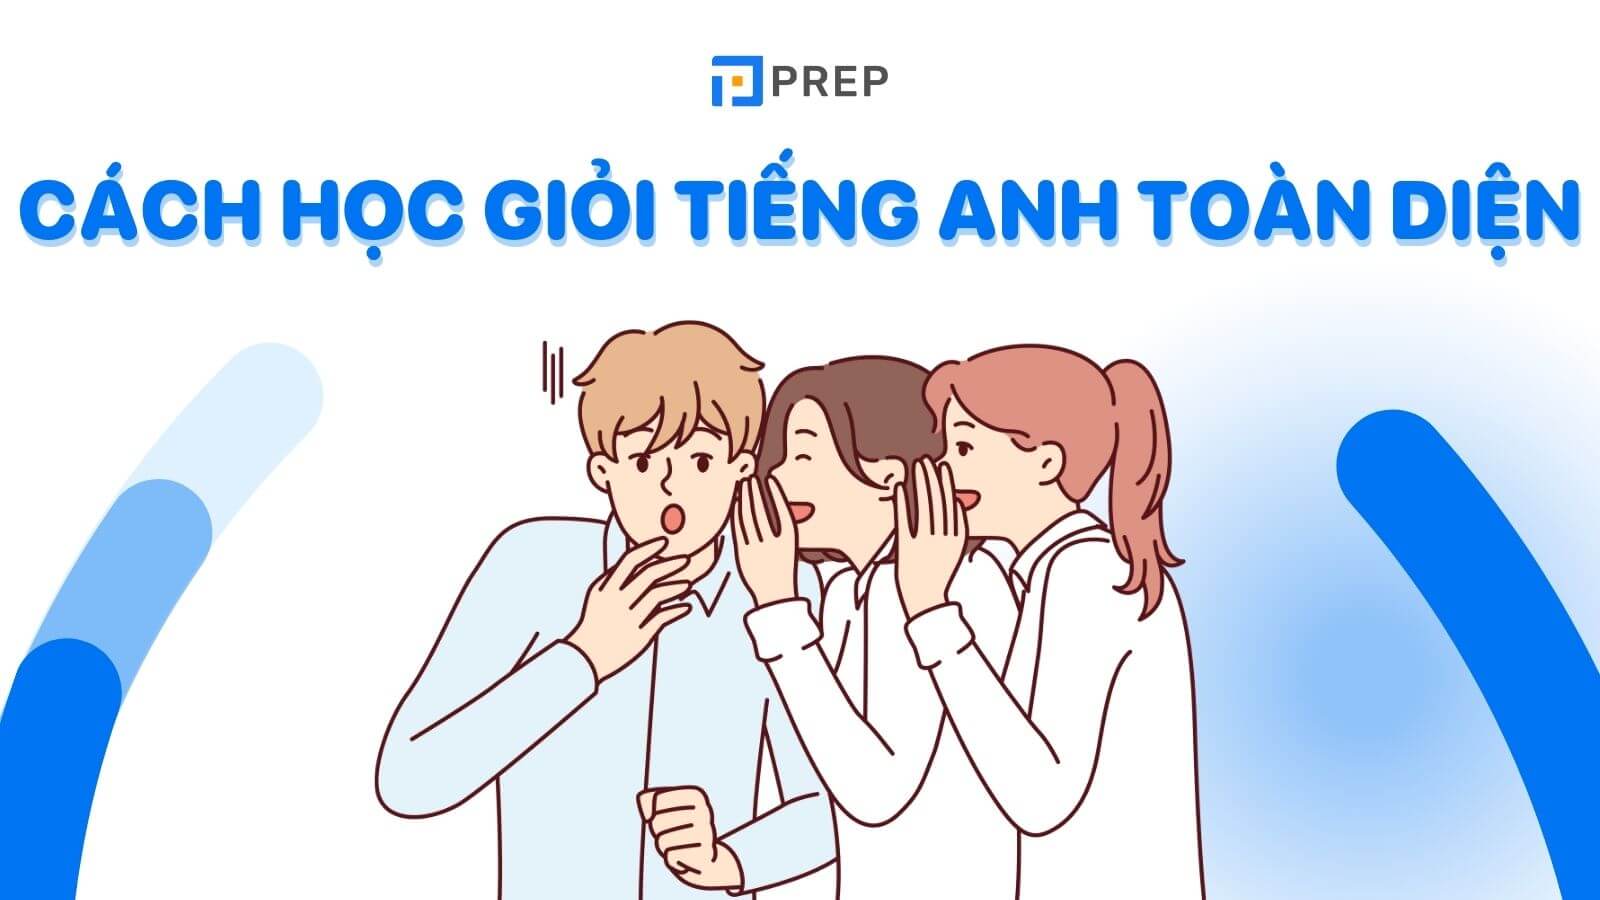 cach-hoc-gioi-tieng-anh-toan-dien.jpg